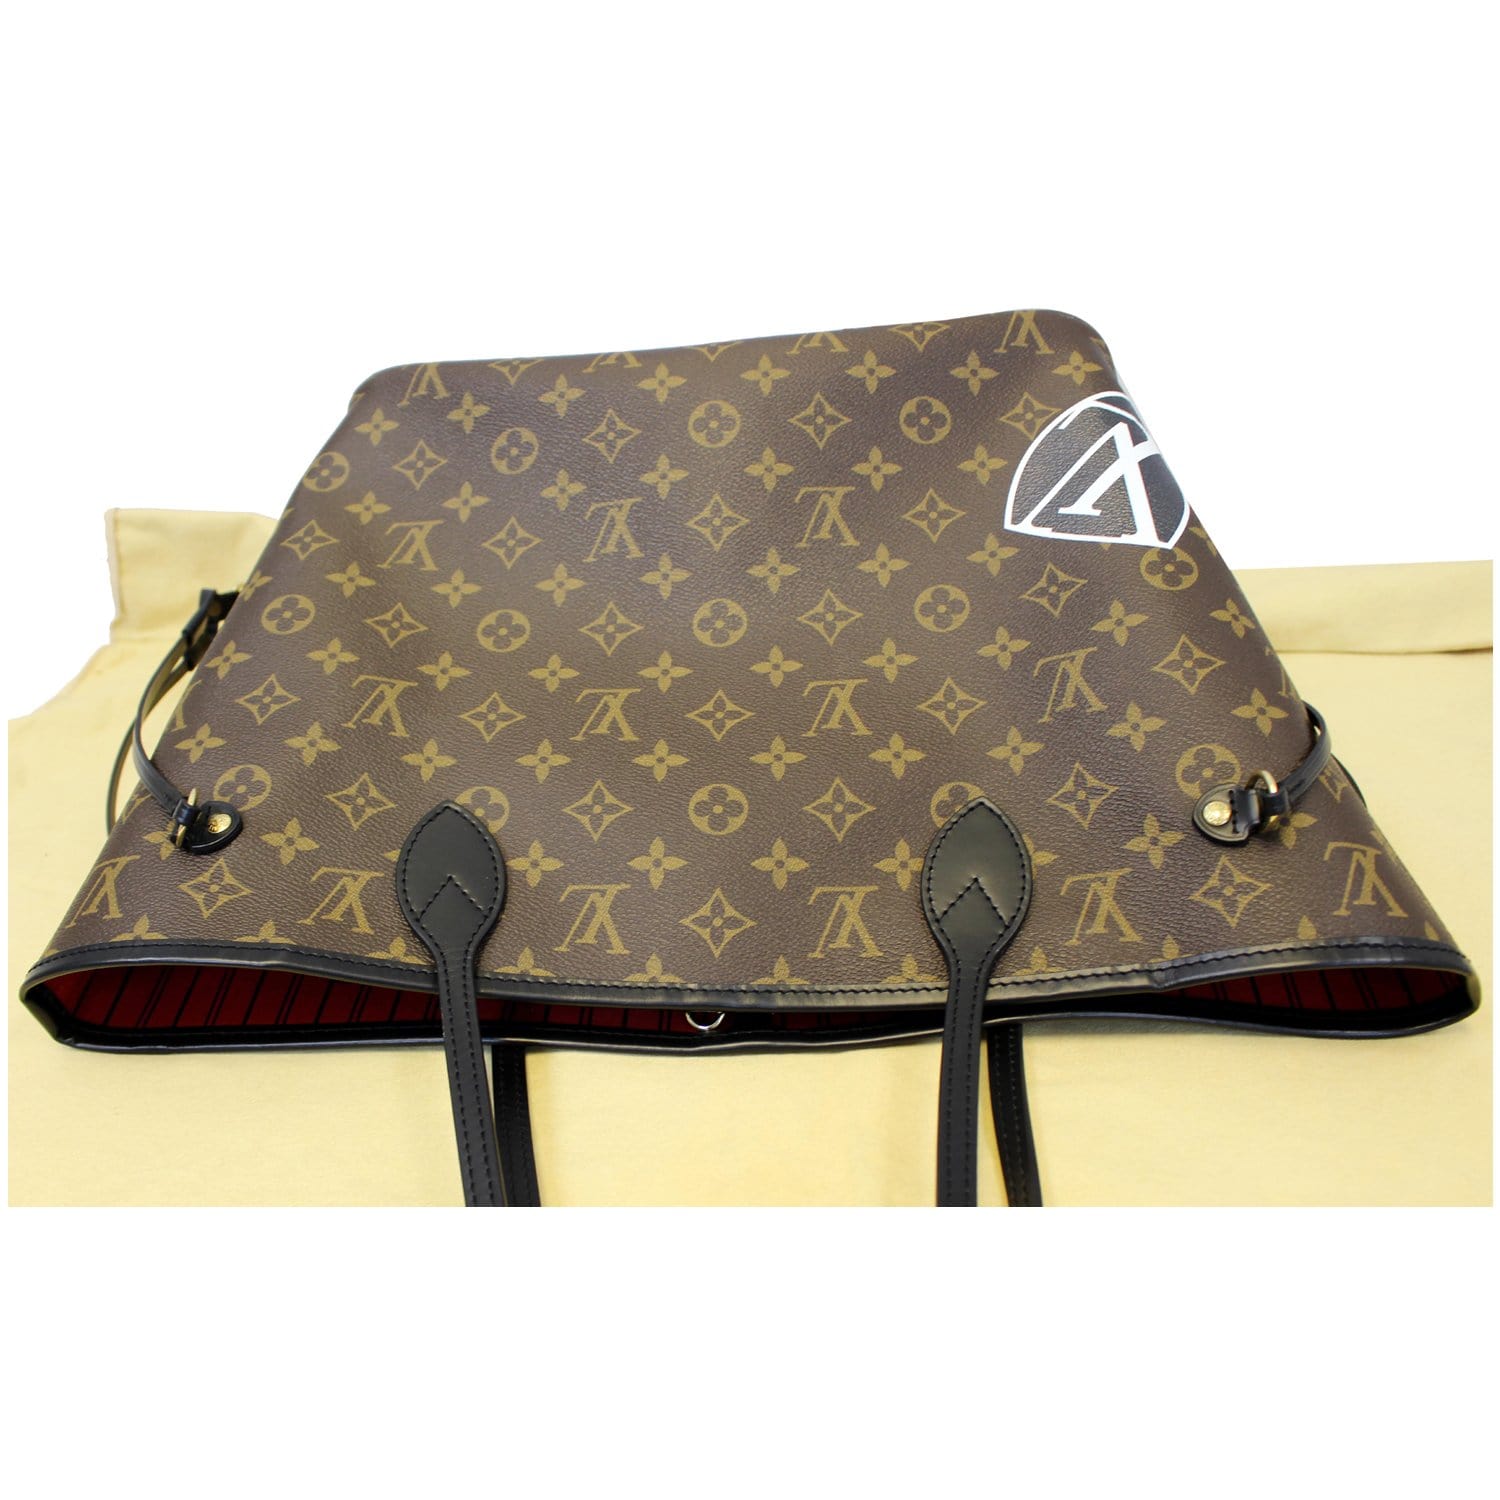 Louis Vuitton Neverfull My LV World Tour Tote